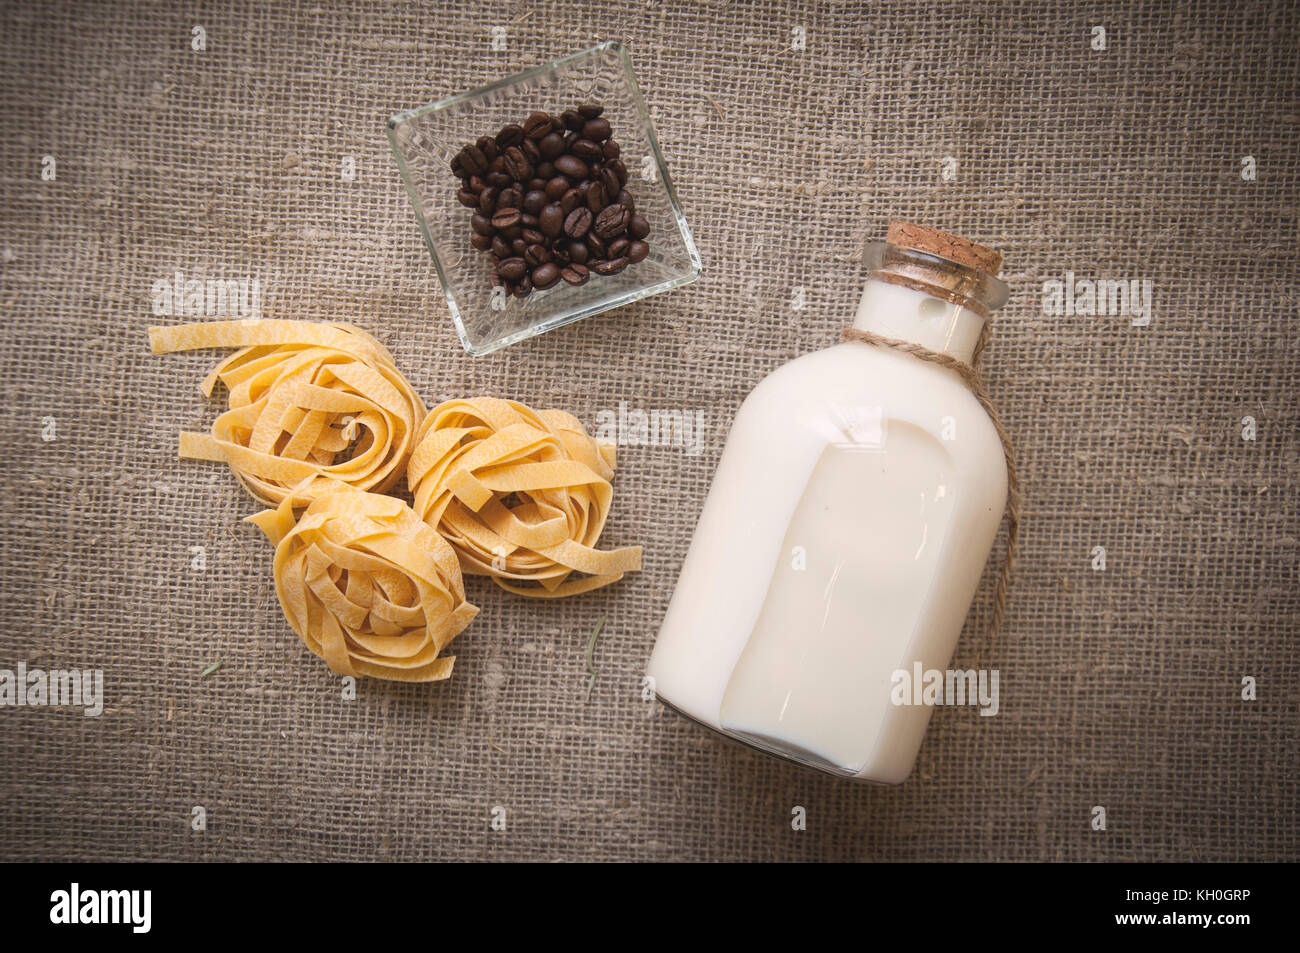 bottle of milk, raw fettuccine pasta and coffee beans Stock Photo